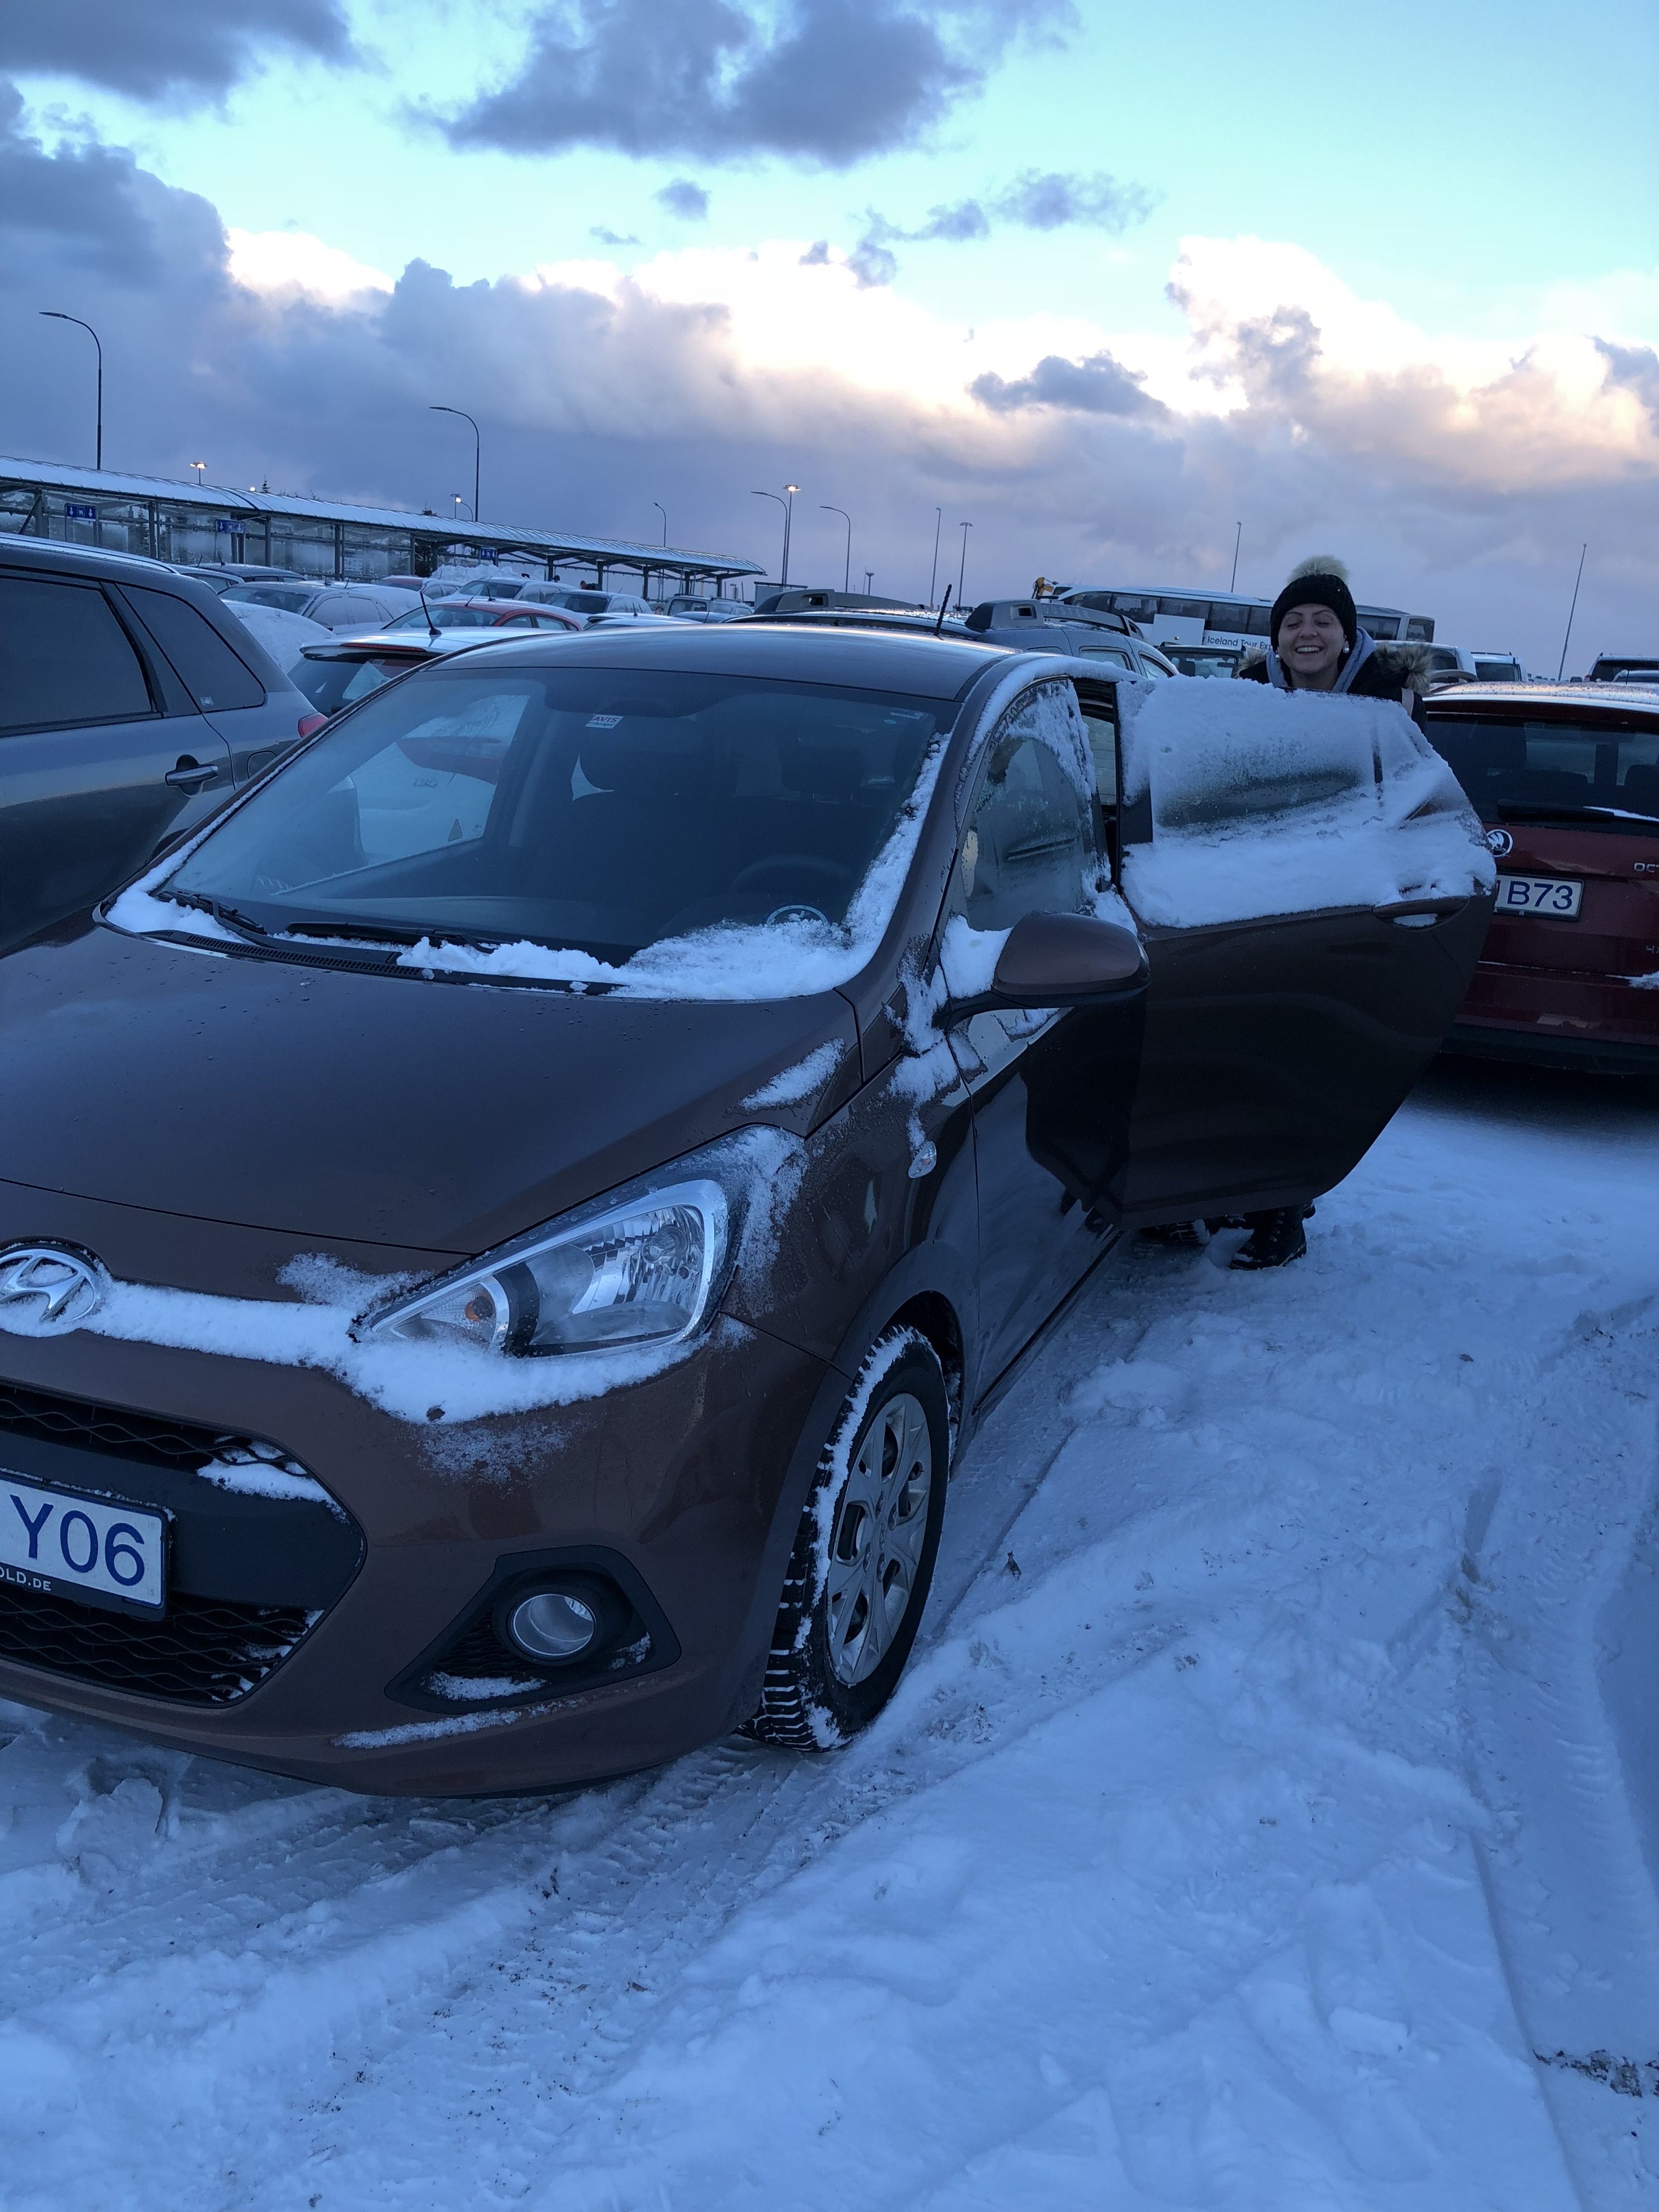 Hire car in the snow